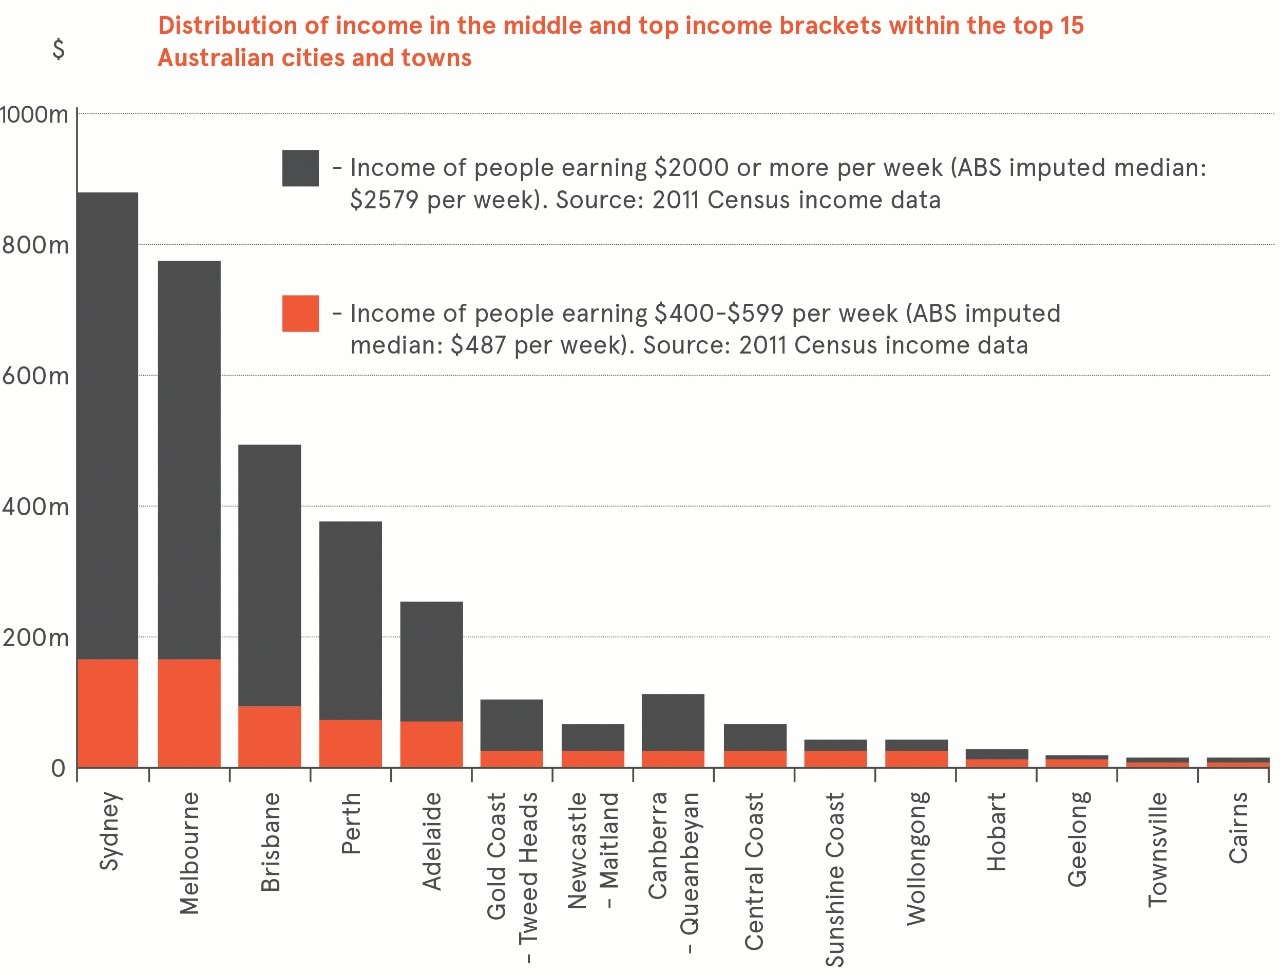 Bar graph shows distribution of income in the middle and top income brackets in the 15 biggest Australian cities and towns